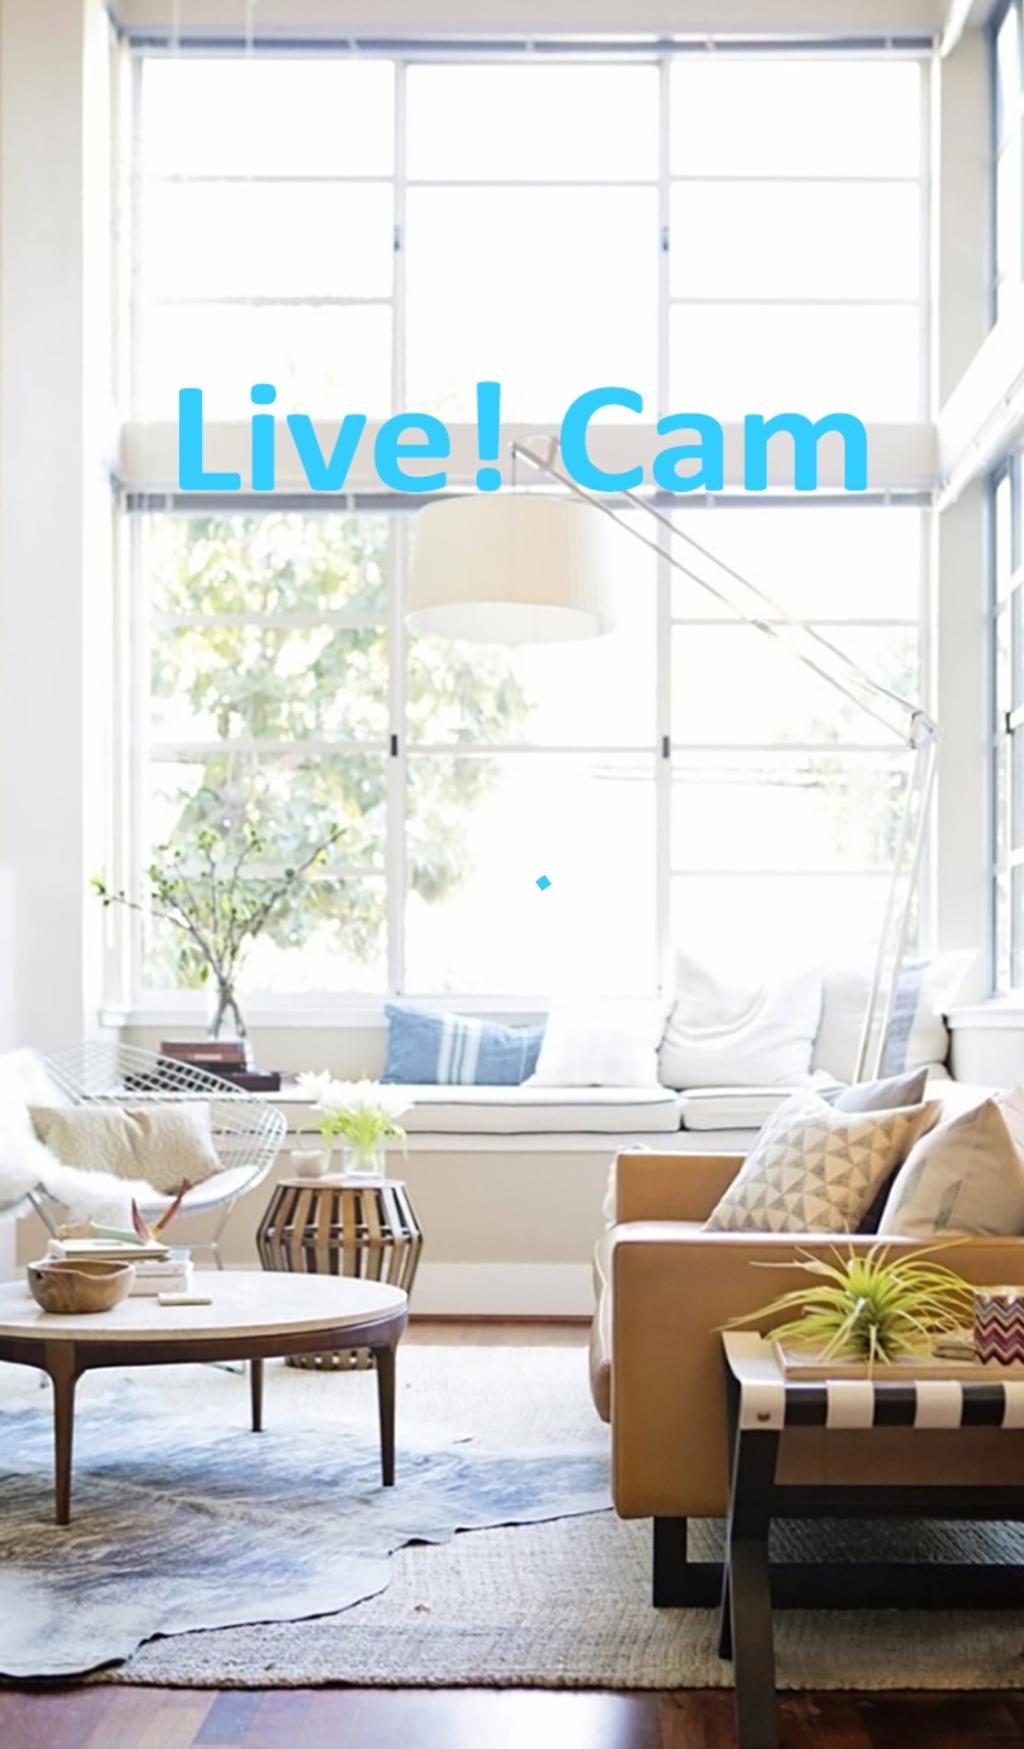 Step 3: Creating an account Open the Live! Cam app.